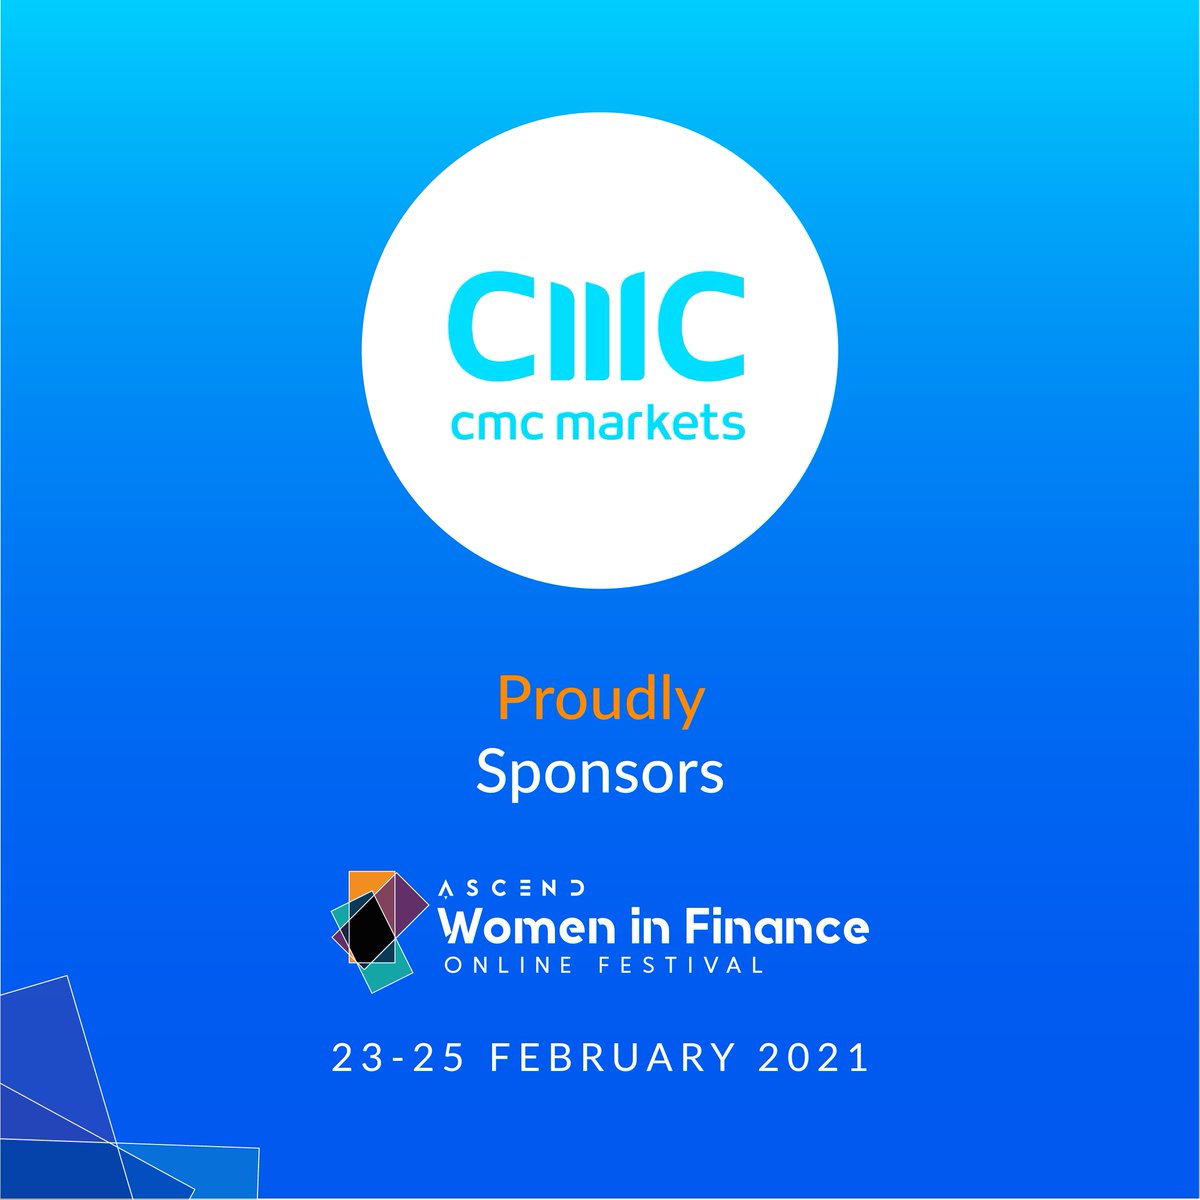 Women In Finance Online Festival Meet Our Sponsor Cmcmarkets Be Sure To Check Out Our Partners Page To Find Out More About Them And Engage With Them Through The Live